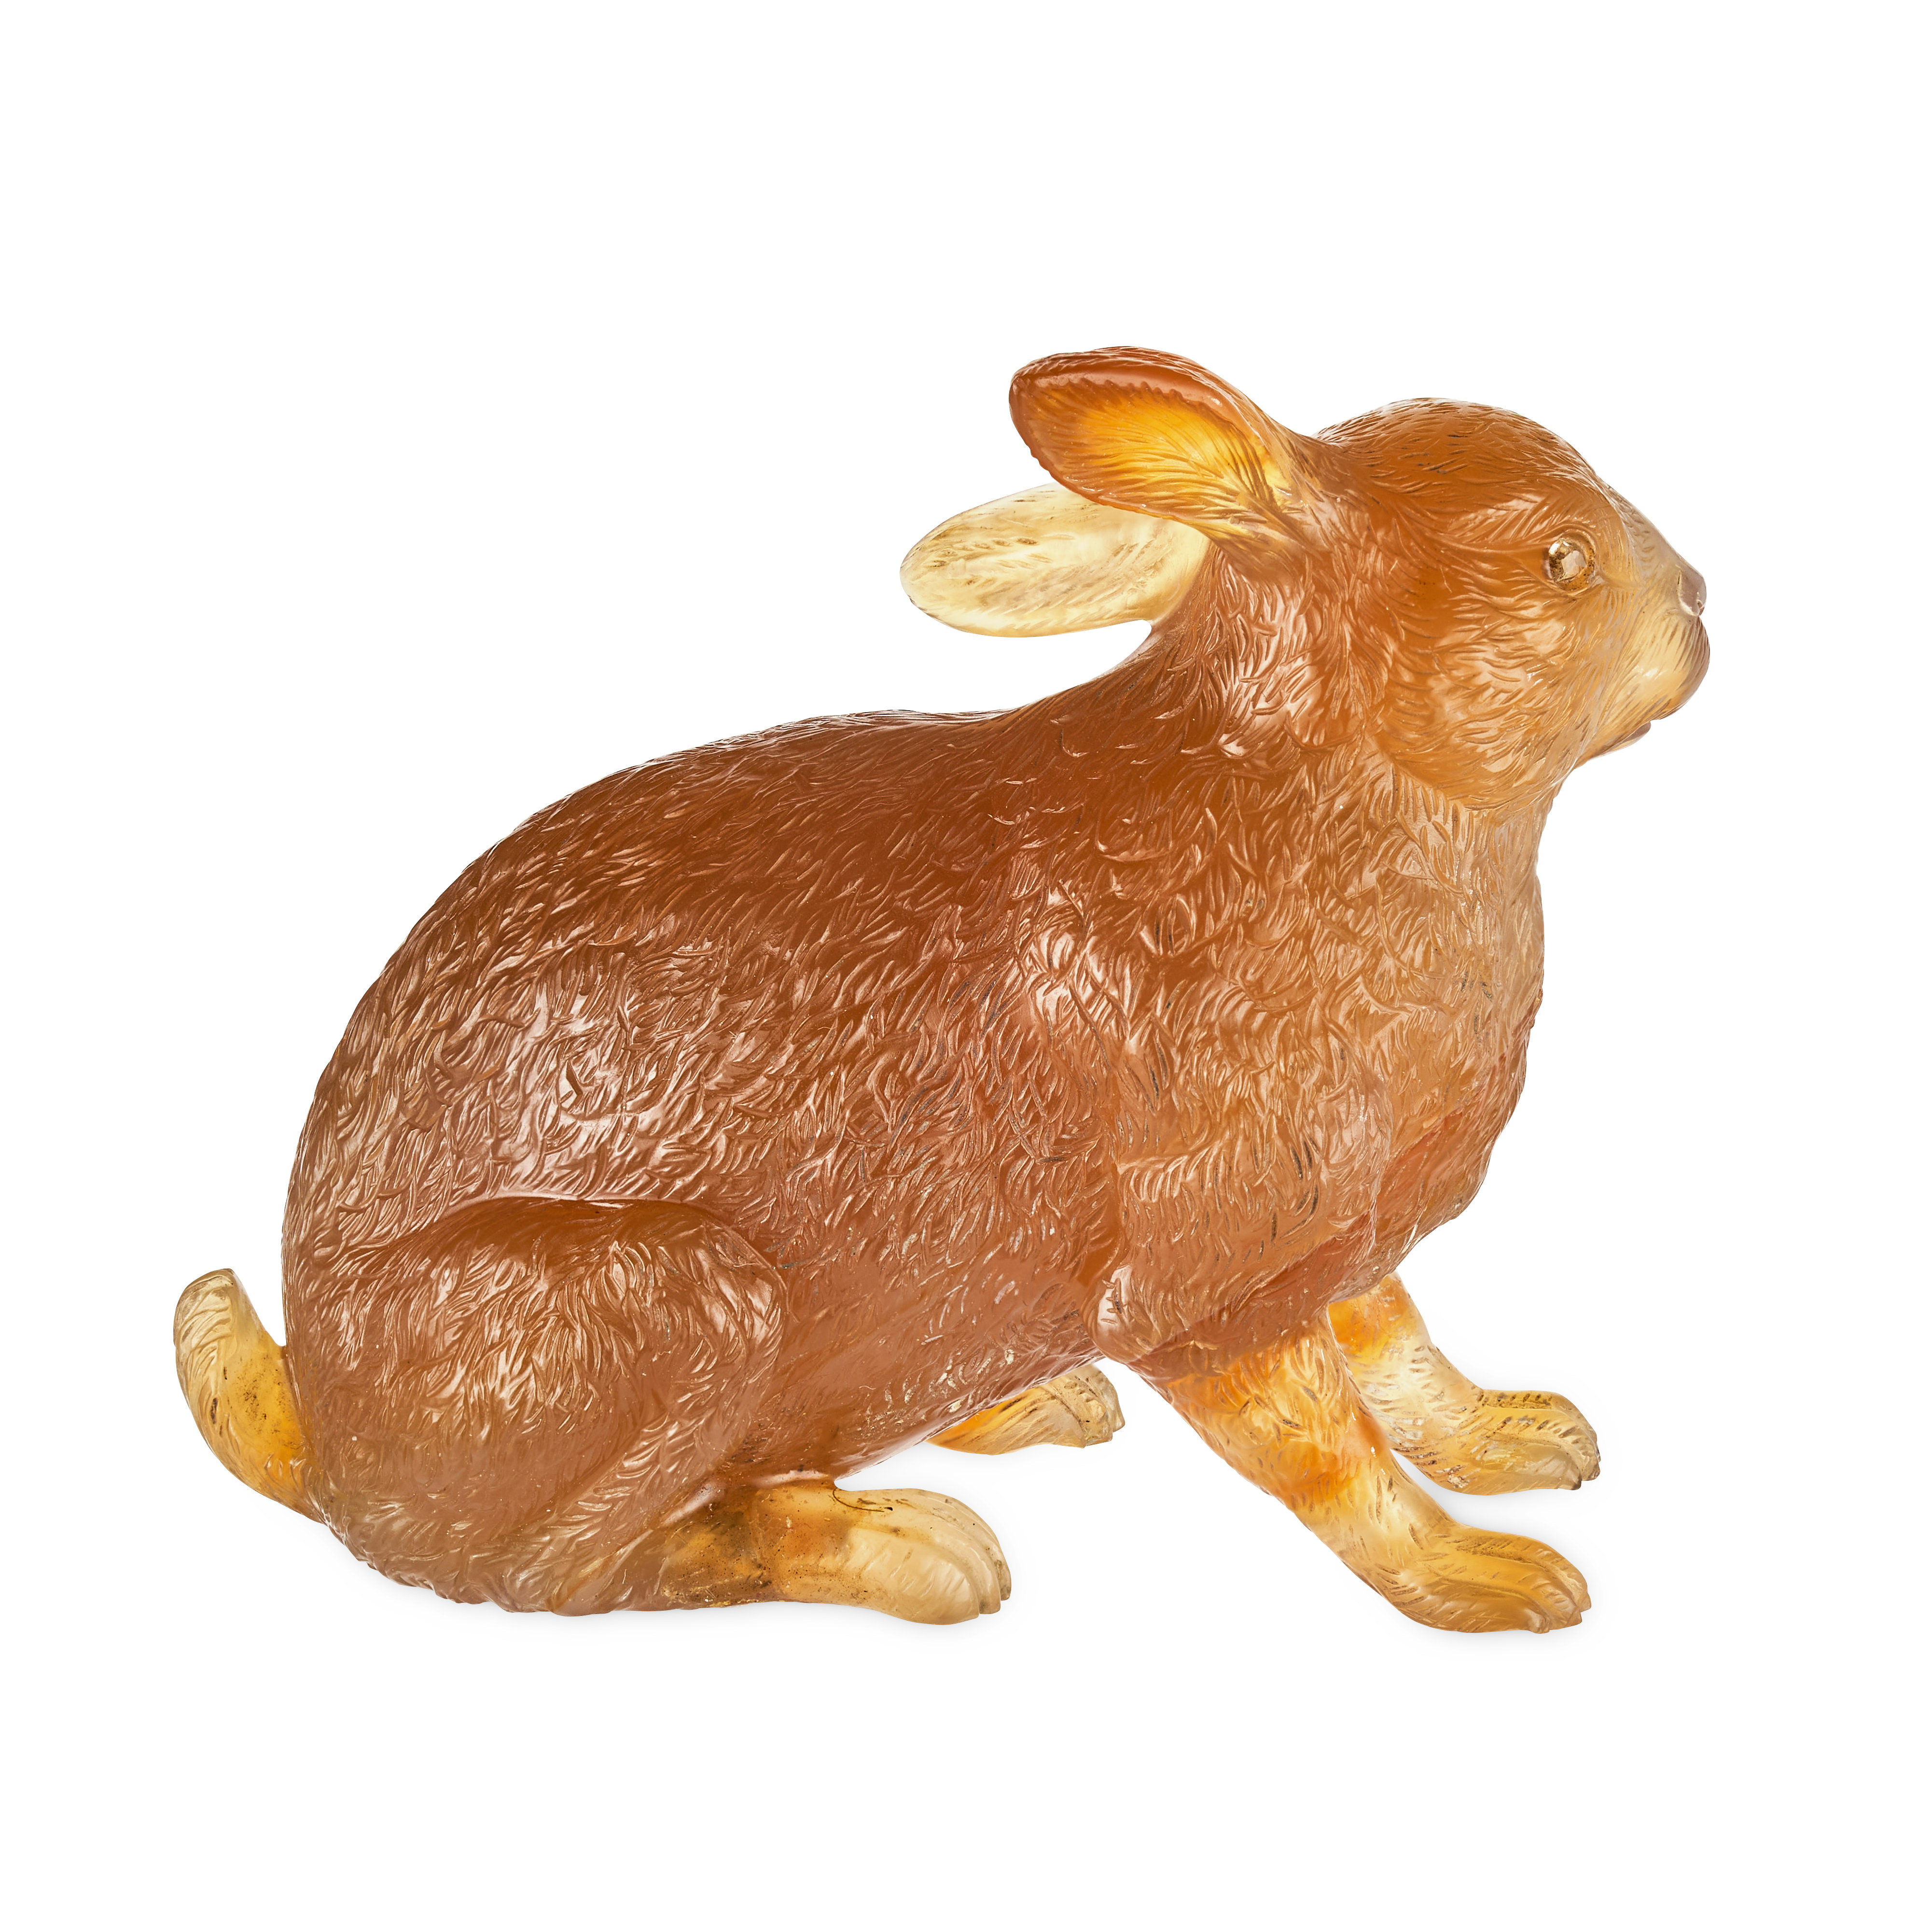 FABERGE, A JEWELLED AGATE FIGURE OF A HARE / LEVERETT, ST PETERSBURG, CIRCA 1900 - Image 6 of 10